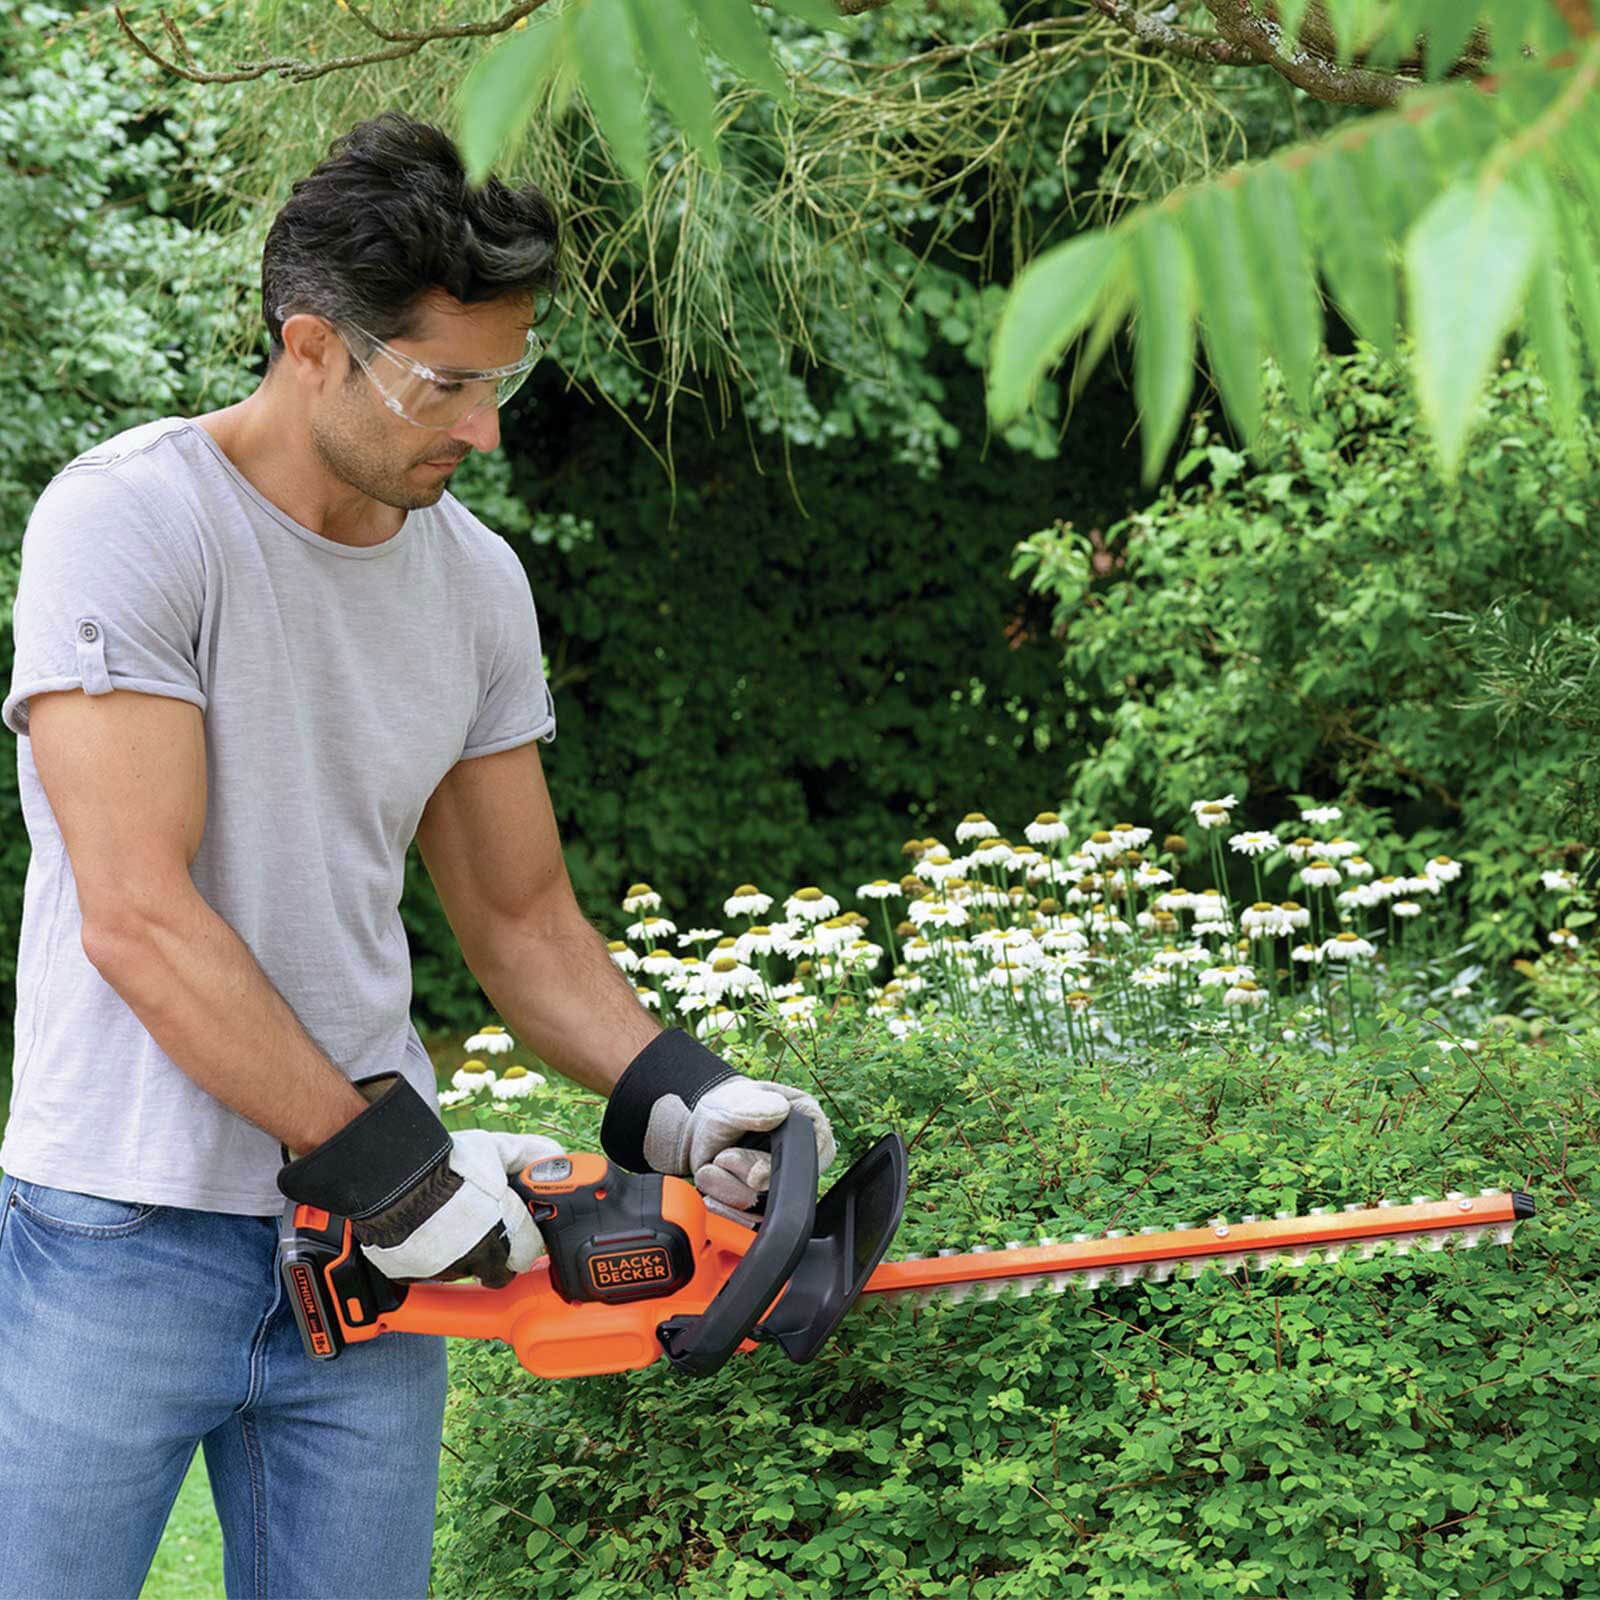 Buy BLACK + DECKER Strimmer GTC18452PC Cordless Hedge Trimmer with 1 Battery